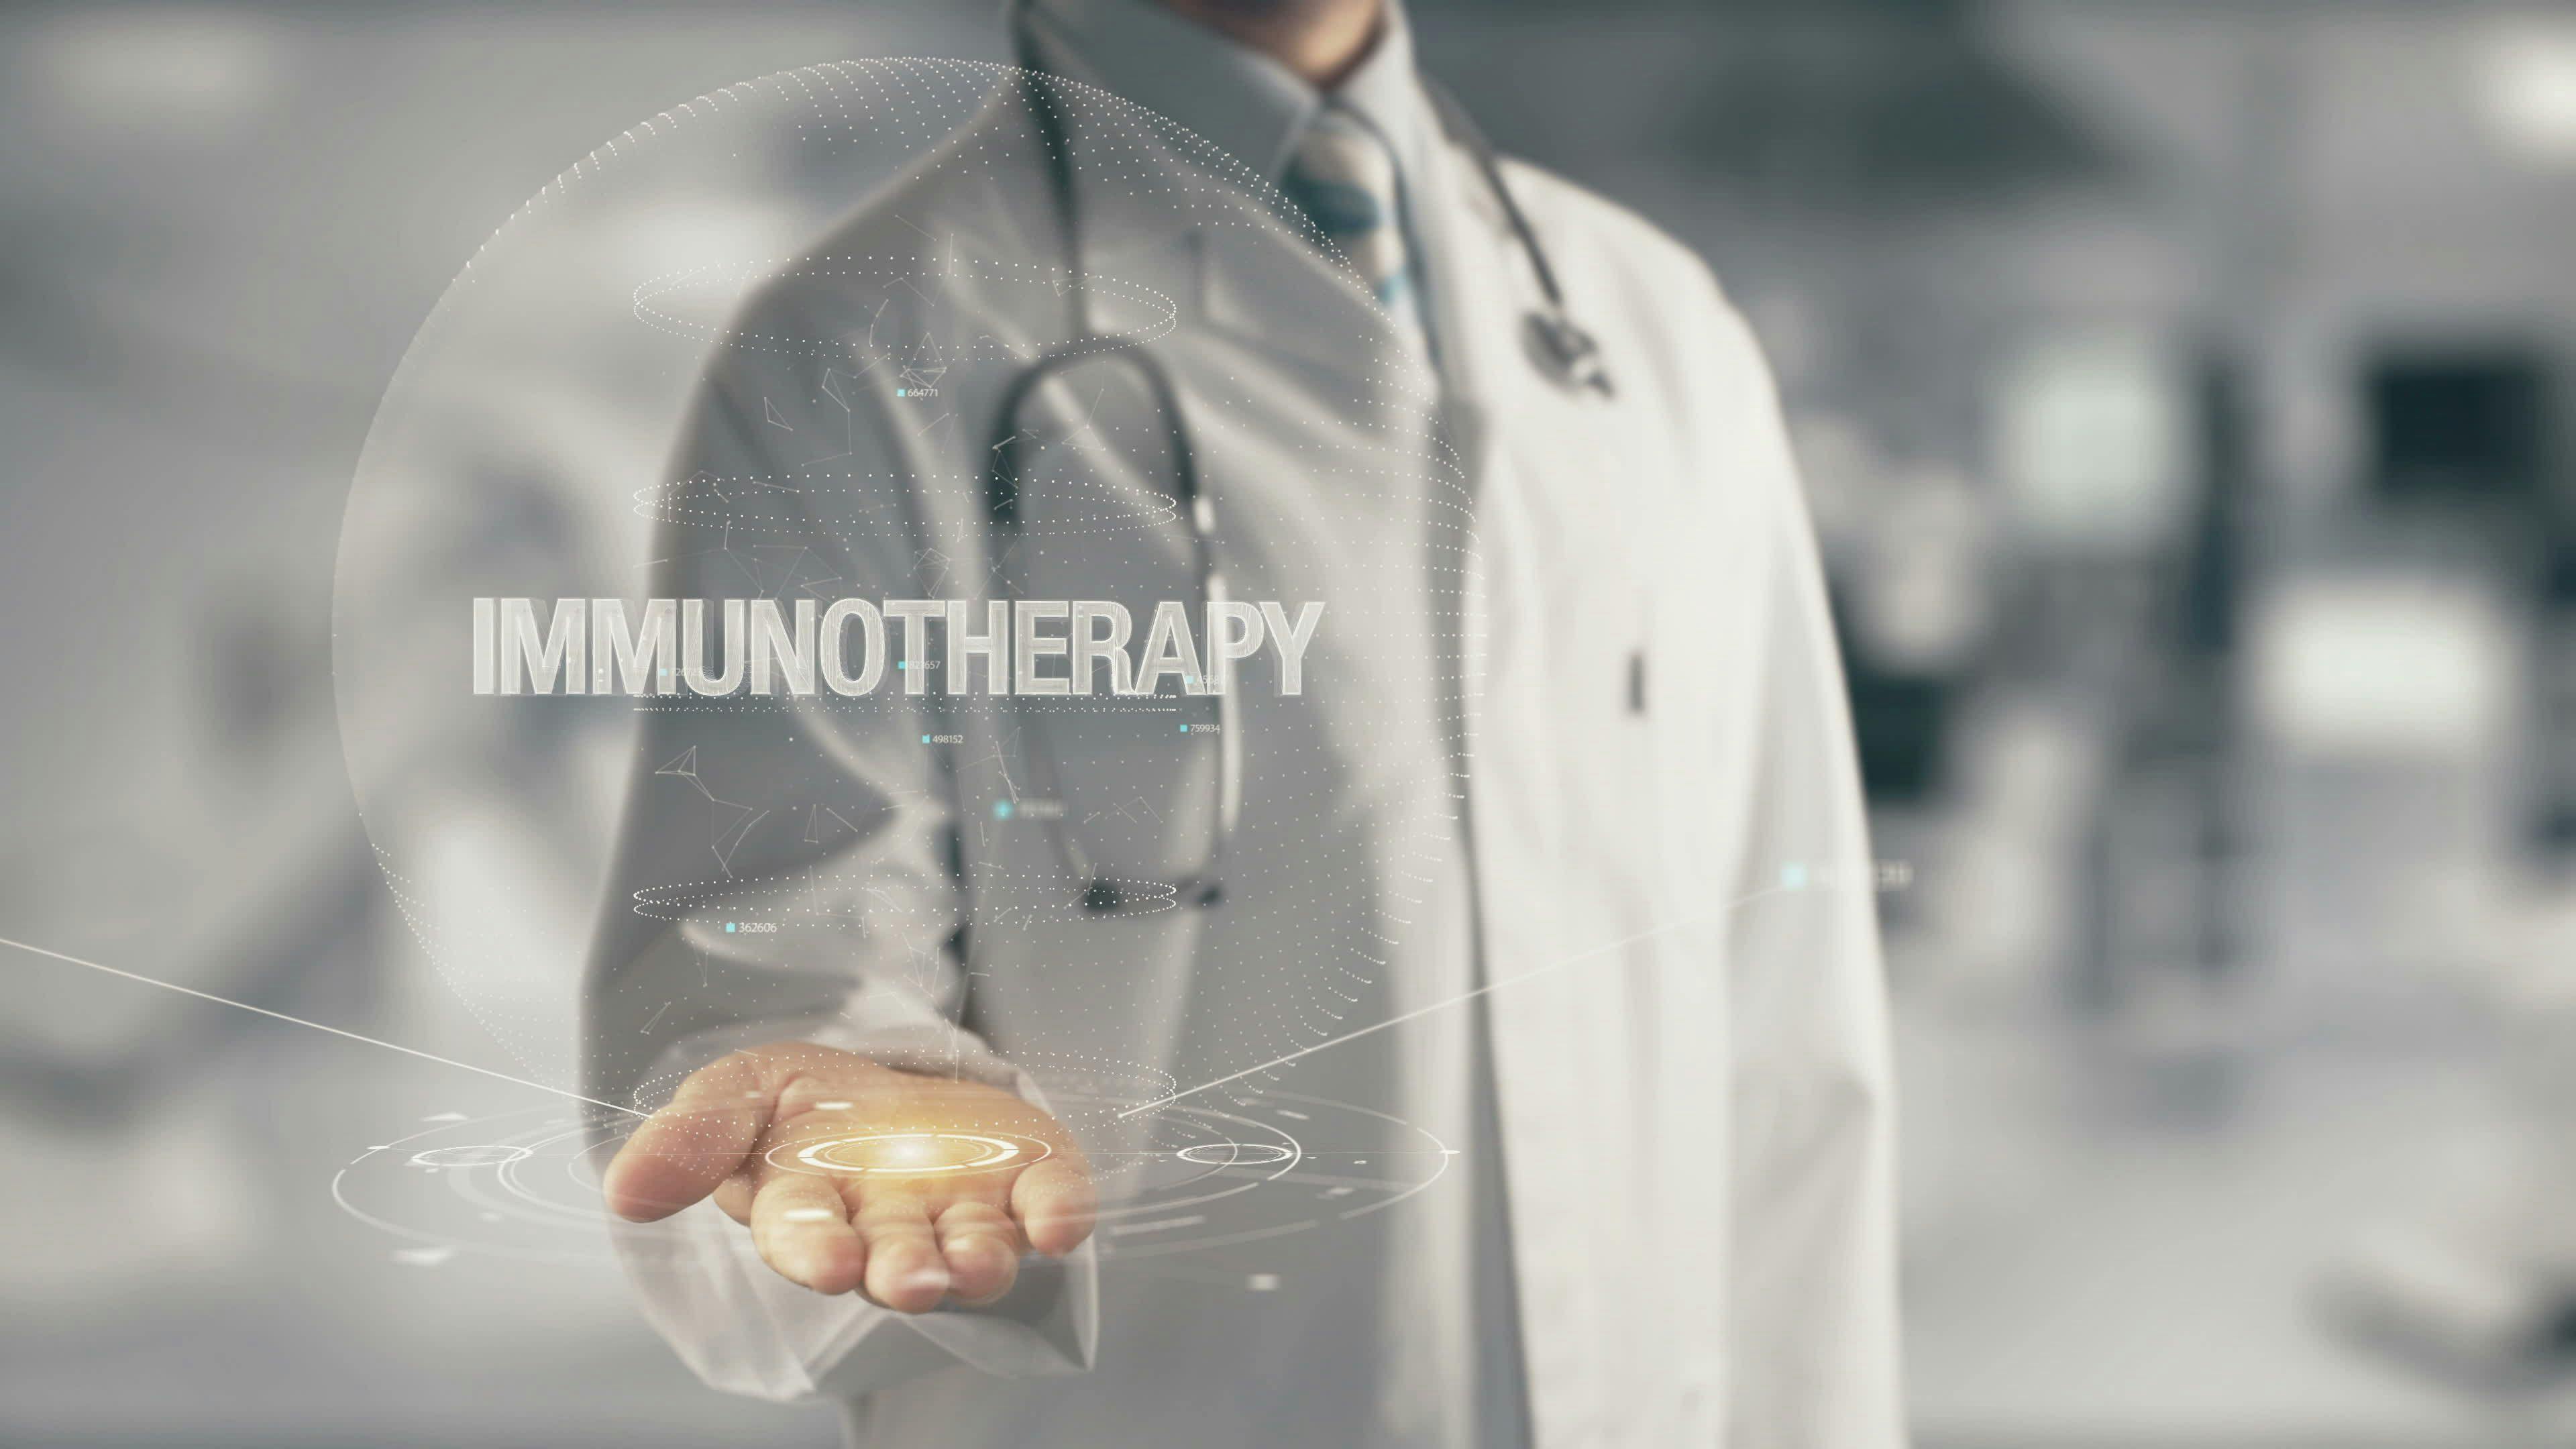 Doctor holding in hand Immunotherapy: © Anar Mammadov - stock.adobe.com